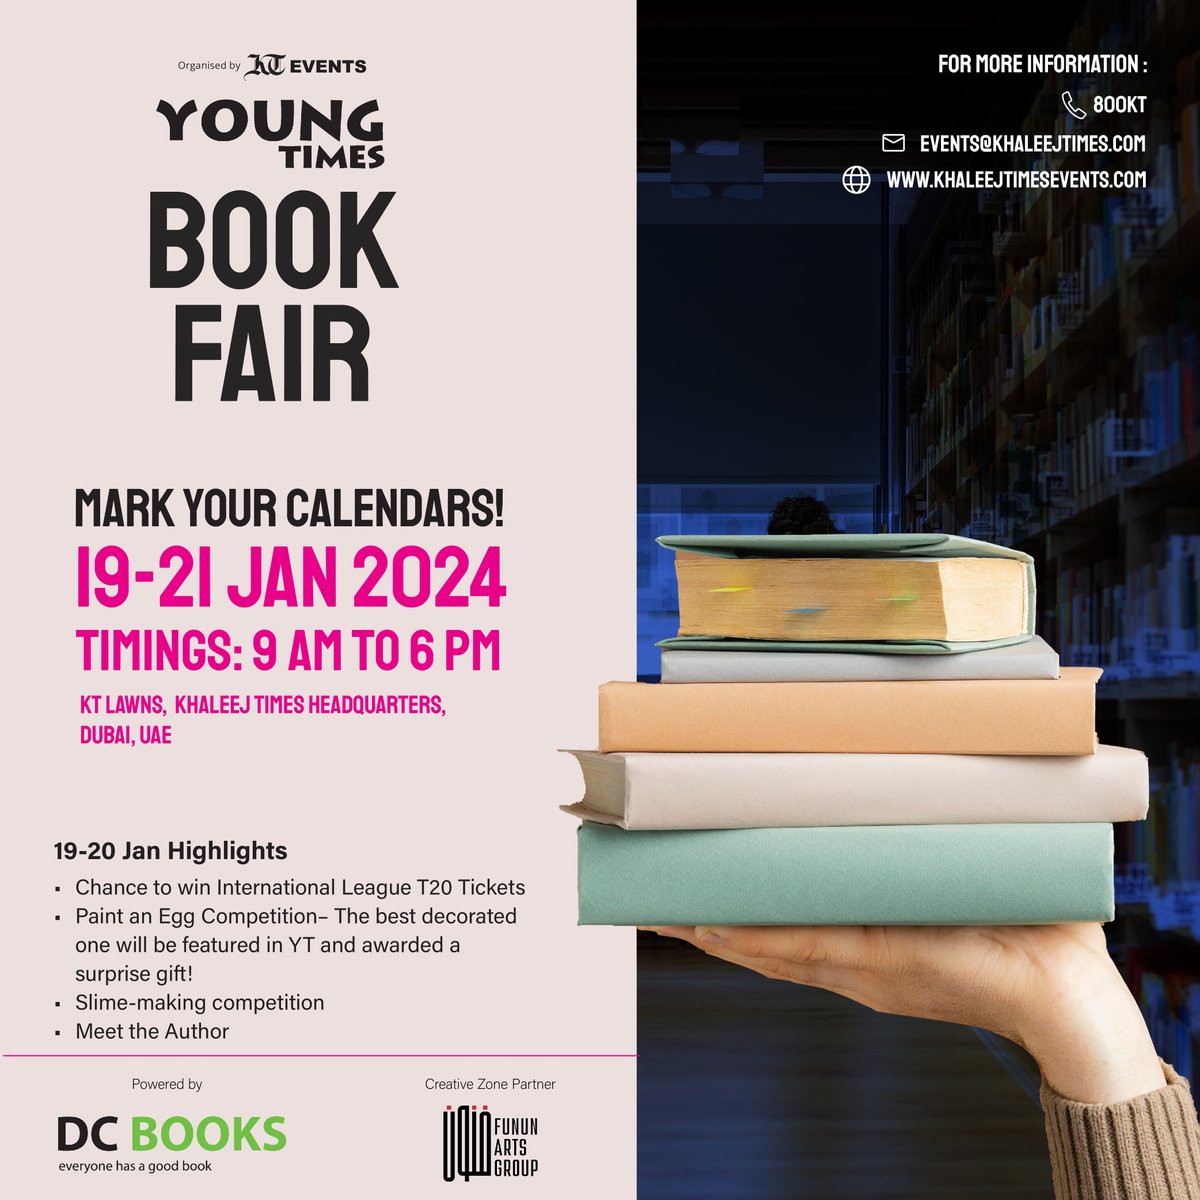 📖 Bookworms unite at the Young Times Book Fair from January 19-21!

 🎉 Amazing discounts on 10,000+ books and exciting activities await. Bring your friends and family for an unforgettable reading experience! 

#YTBookFair #BookFairBliss #BookFiesta #ReadersDelight #KhaleejTimes